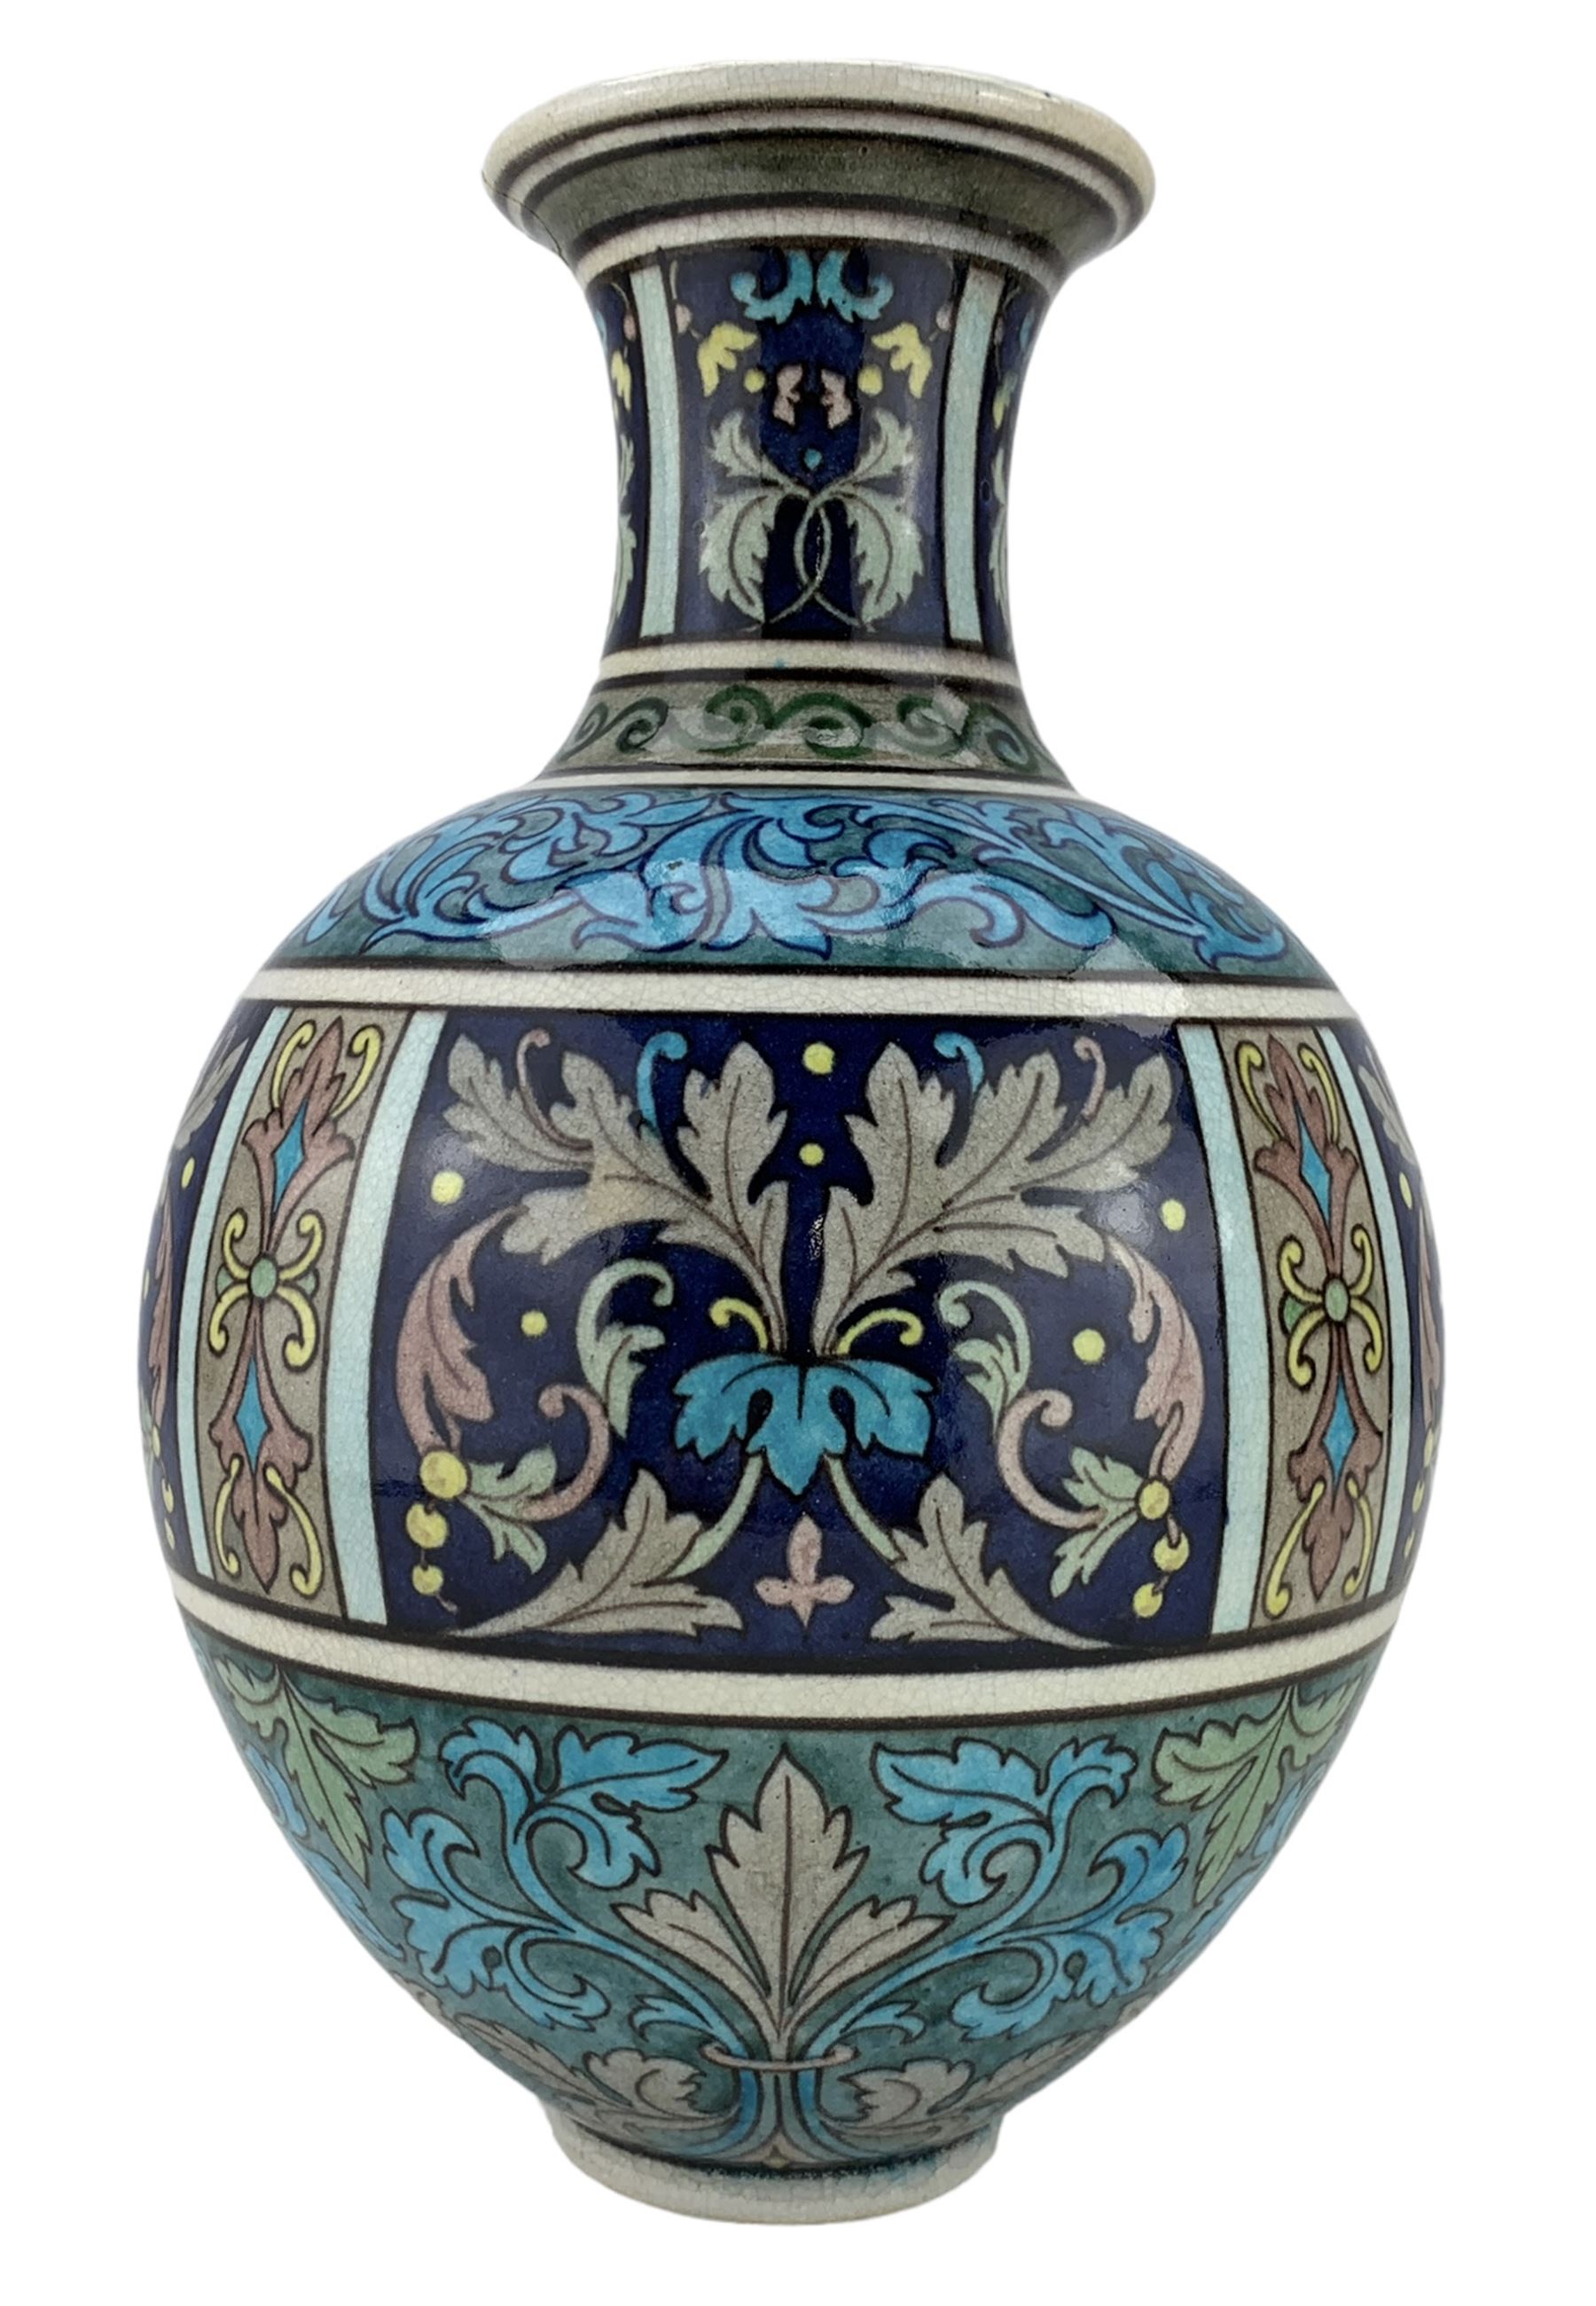 Burmantofts Faience Anglo-Persian vase - Image 3 of 6